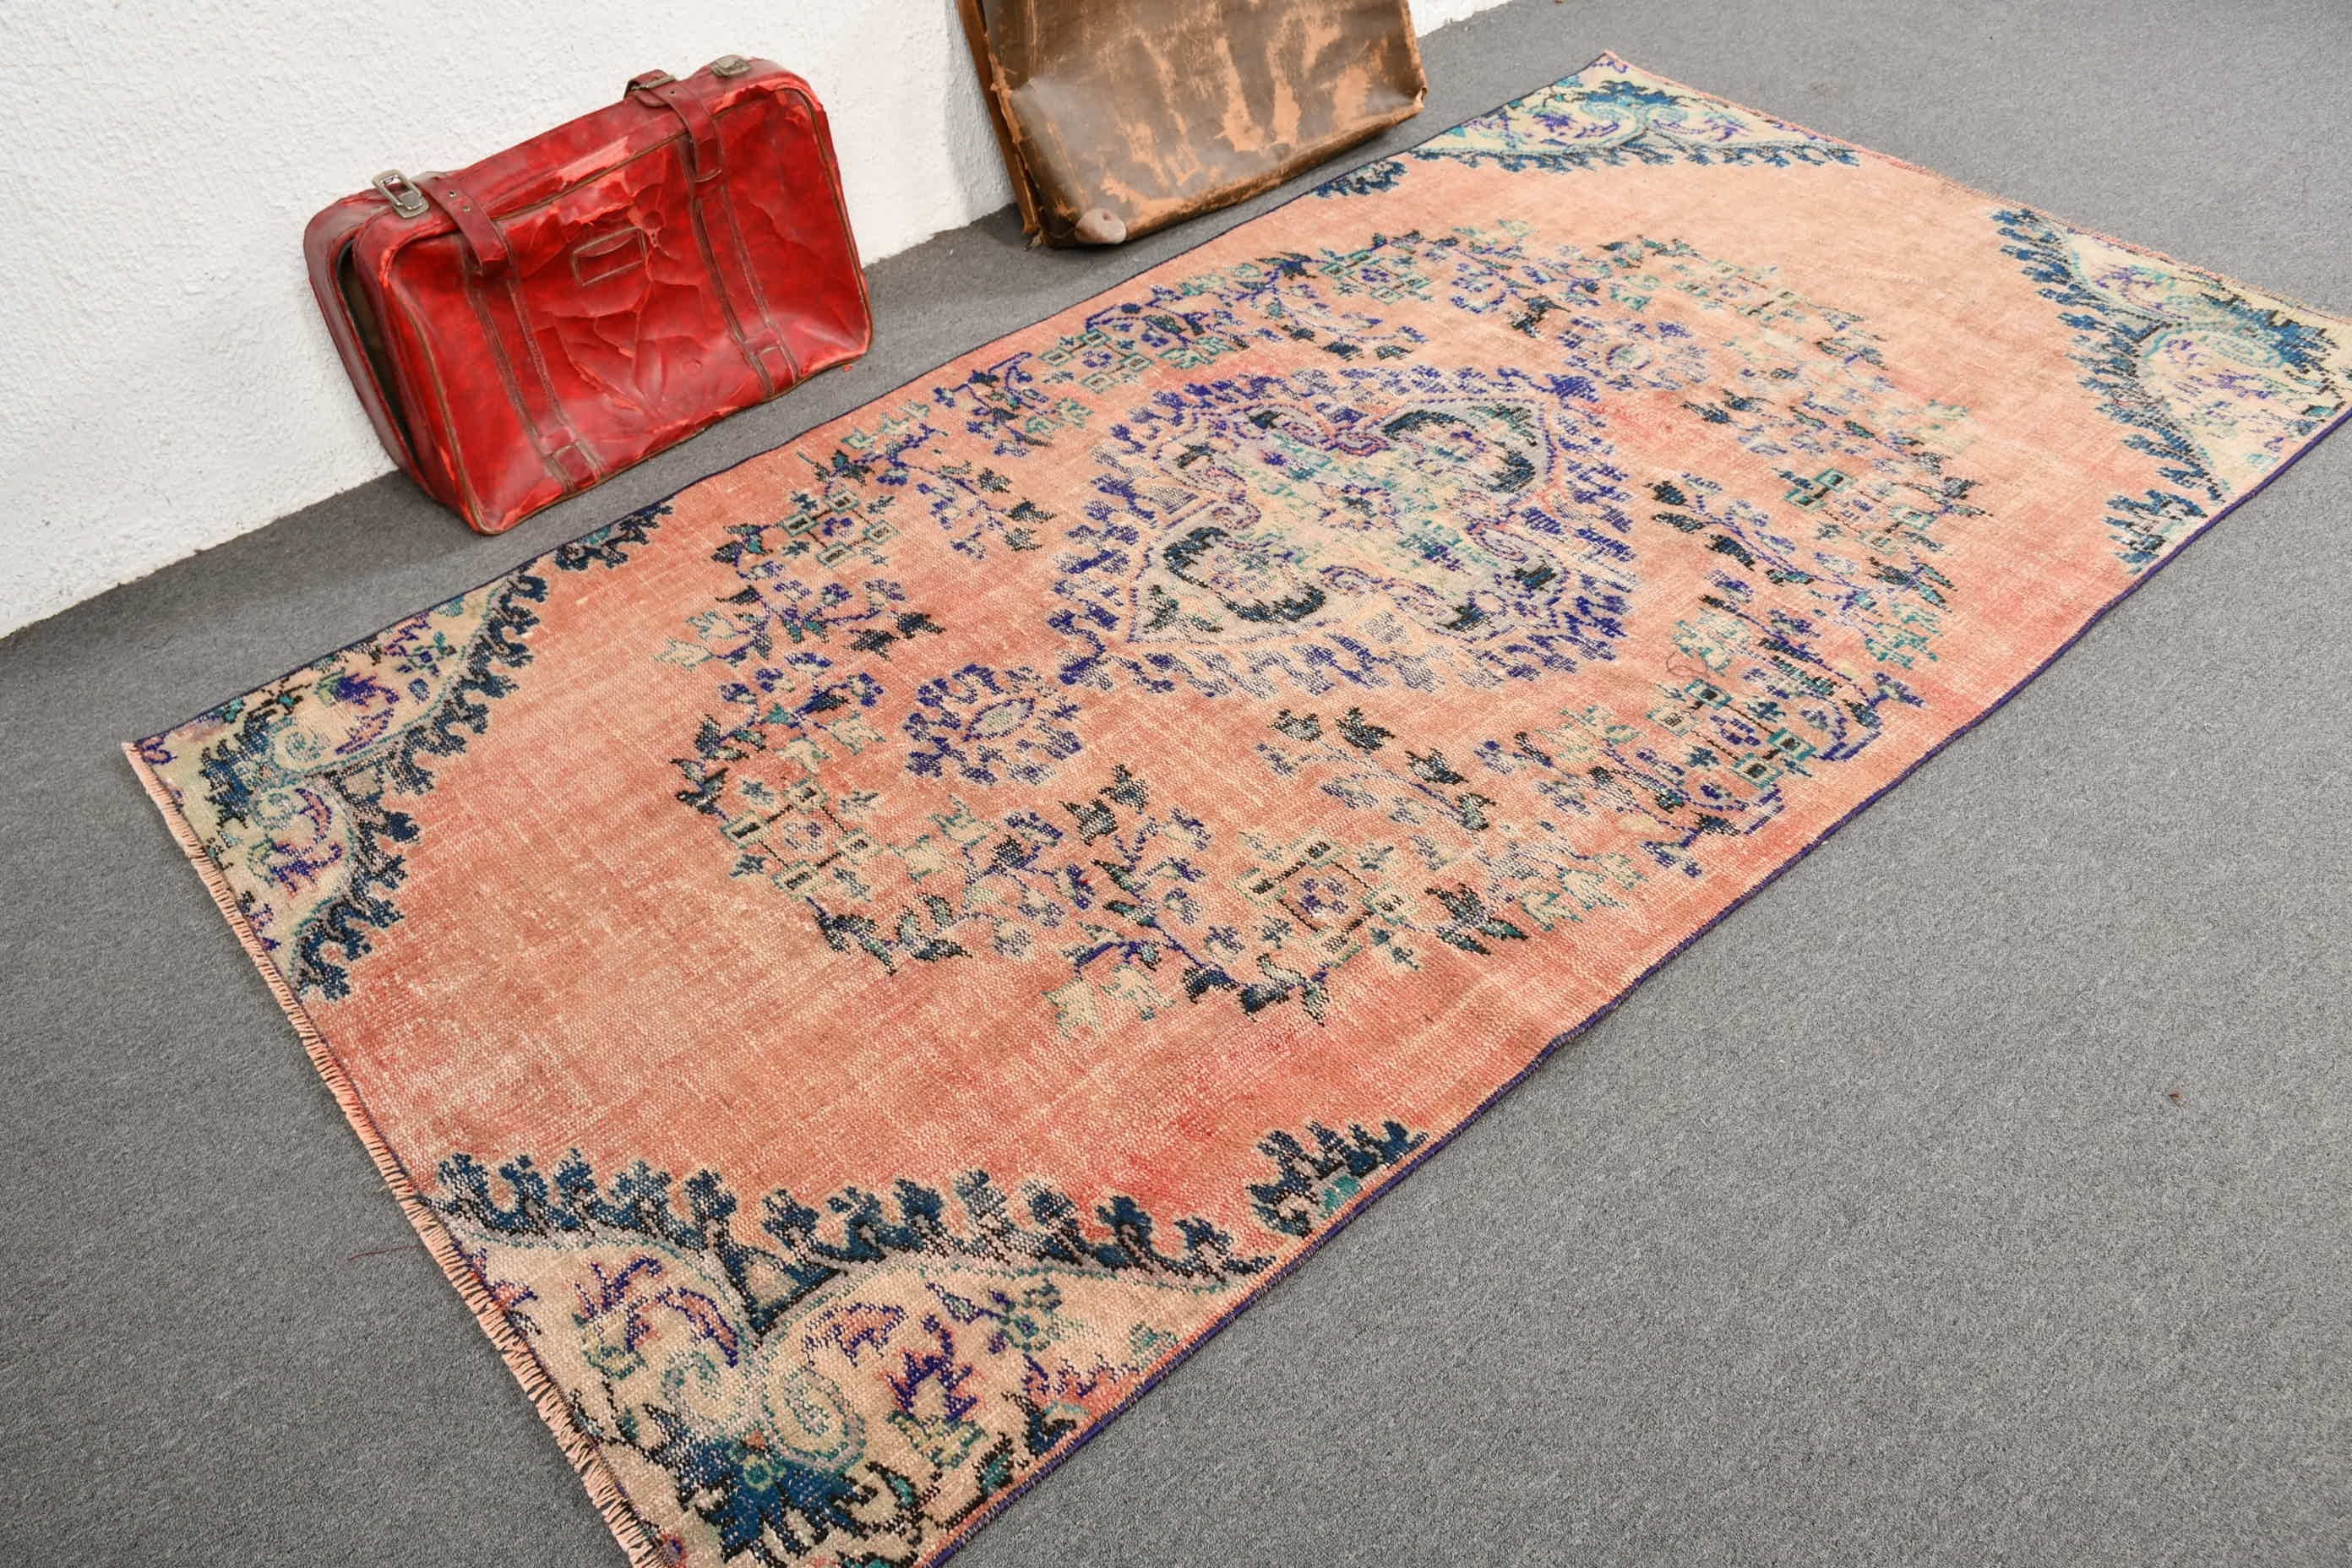 Vintage Rugs, Turkish Rugs, Floor Rug, Kitchen Rug, Rugs for Bedroom, Red Home Decor Rug, Antique Rug, Bright Rug, 4.5x8.3 ft Area Rugs